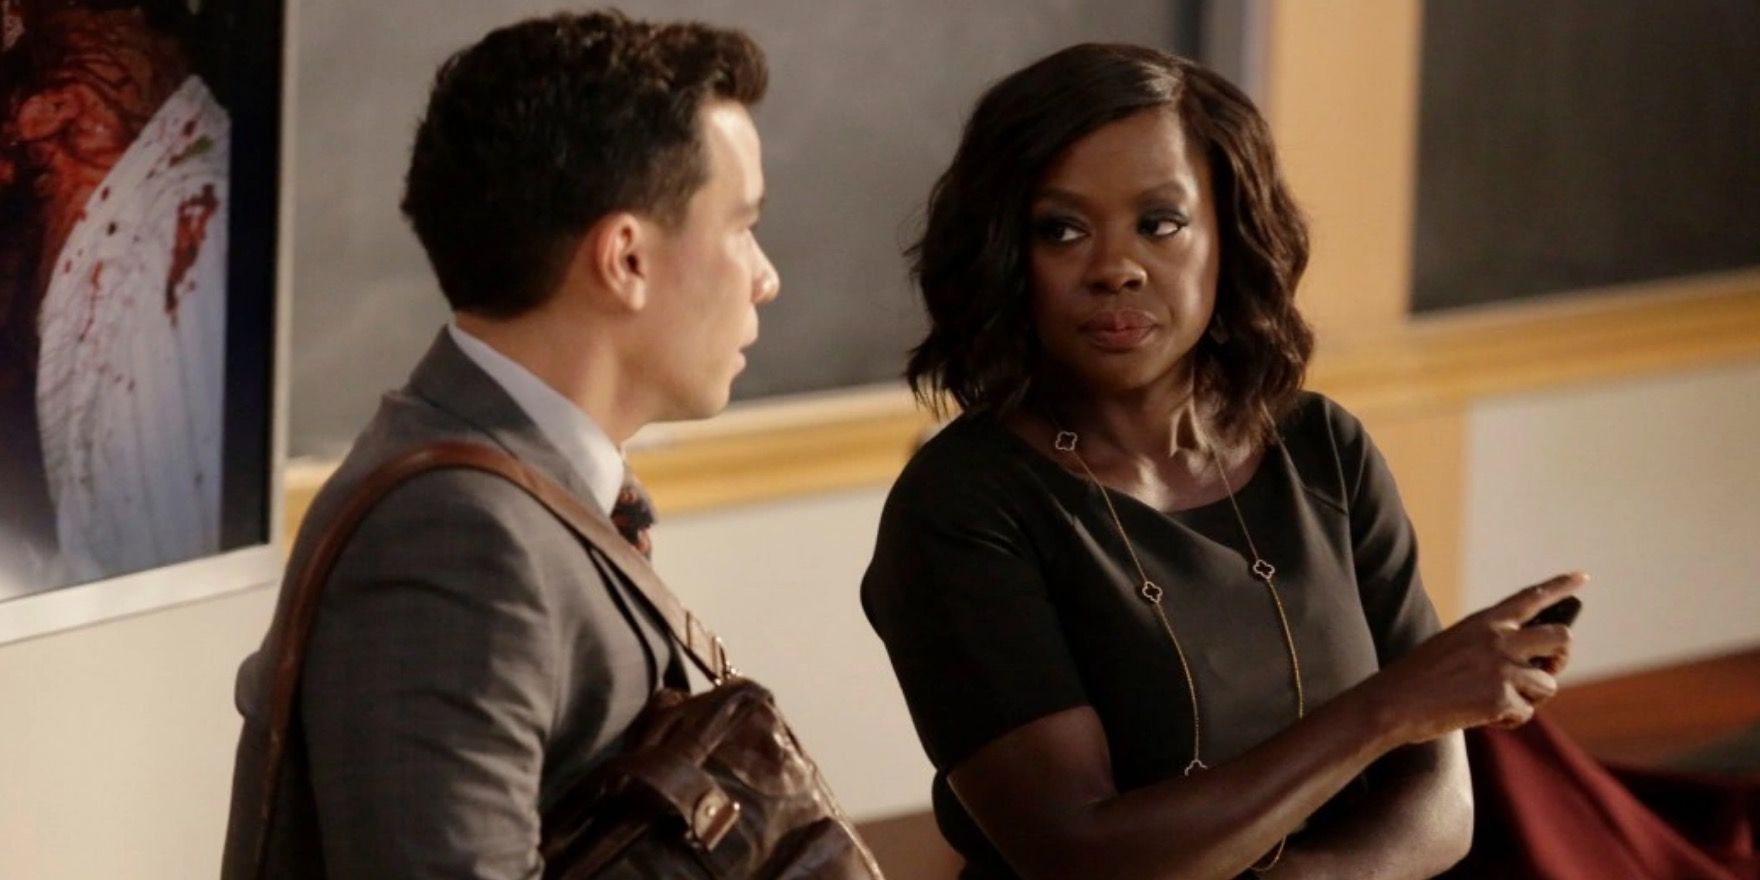 How To Get Away With Murder: Top Episodes of Season 3, Ranked (According To IMDb)